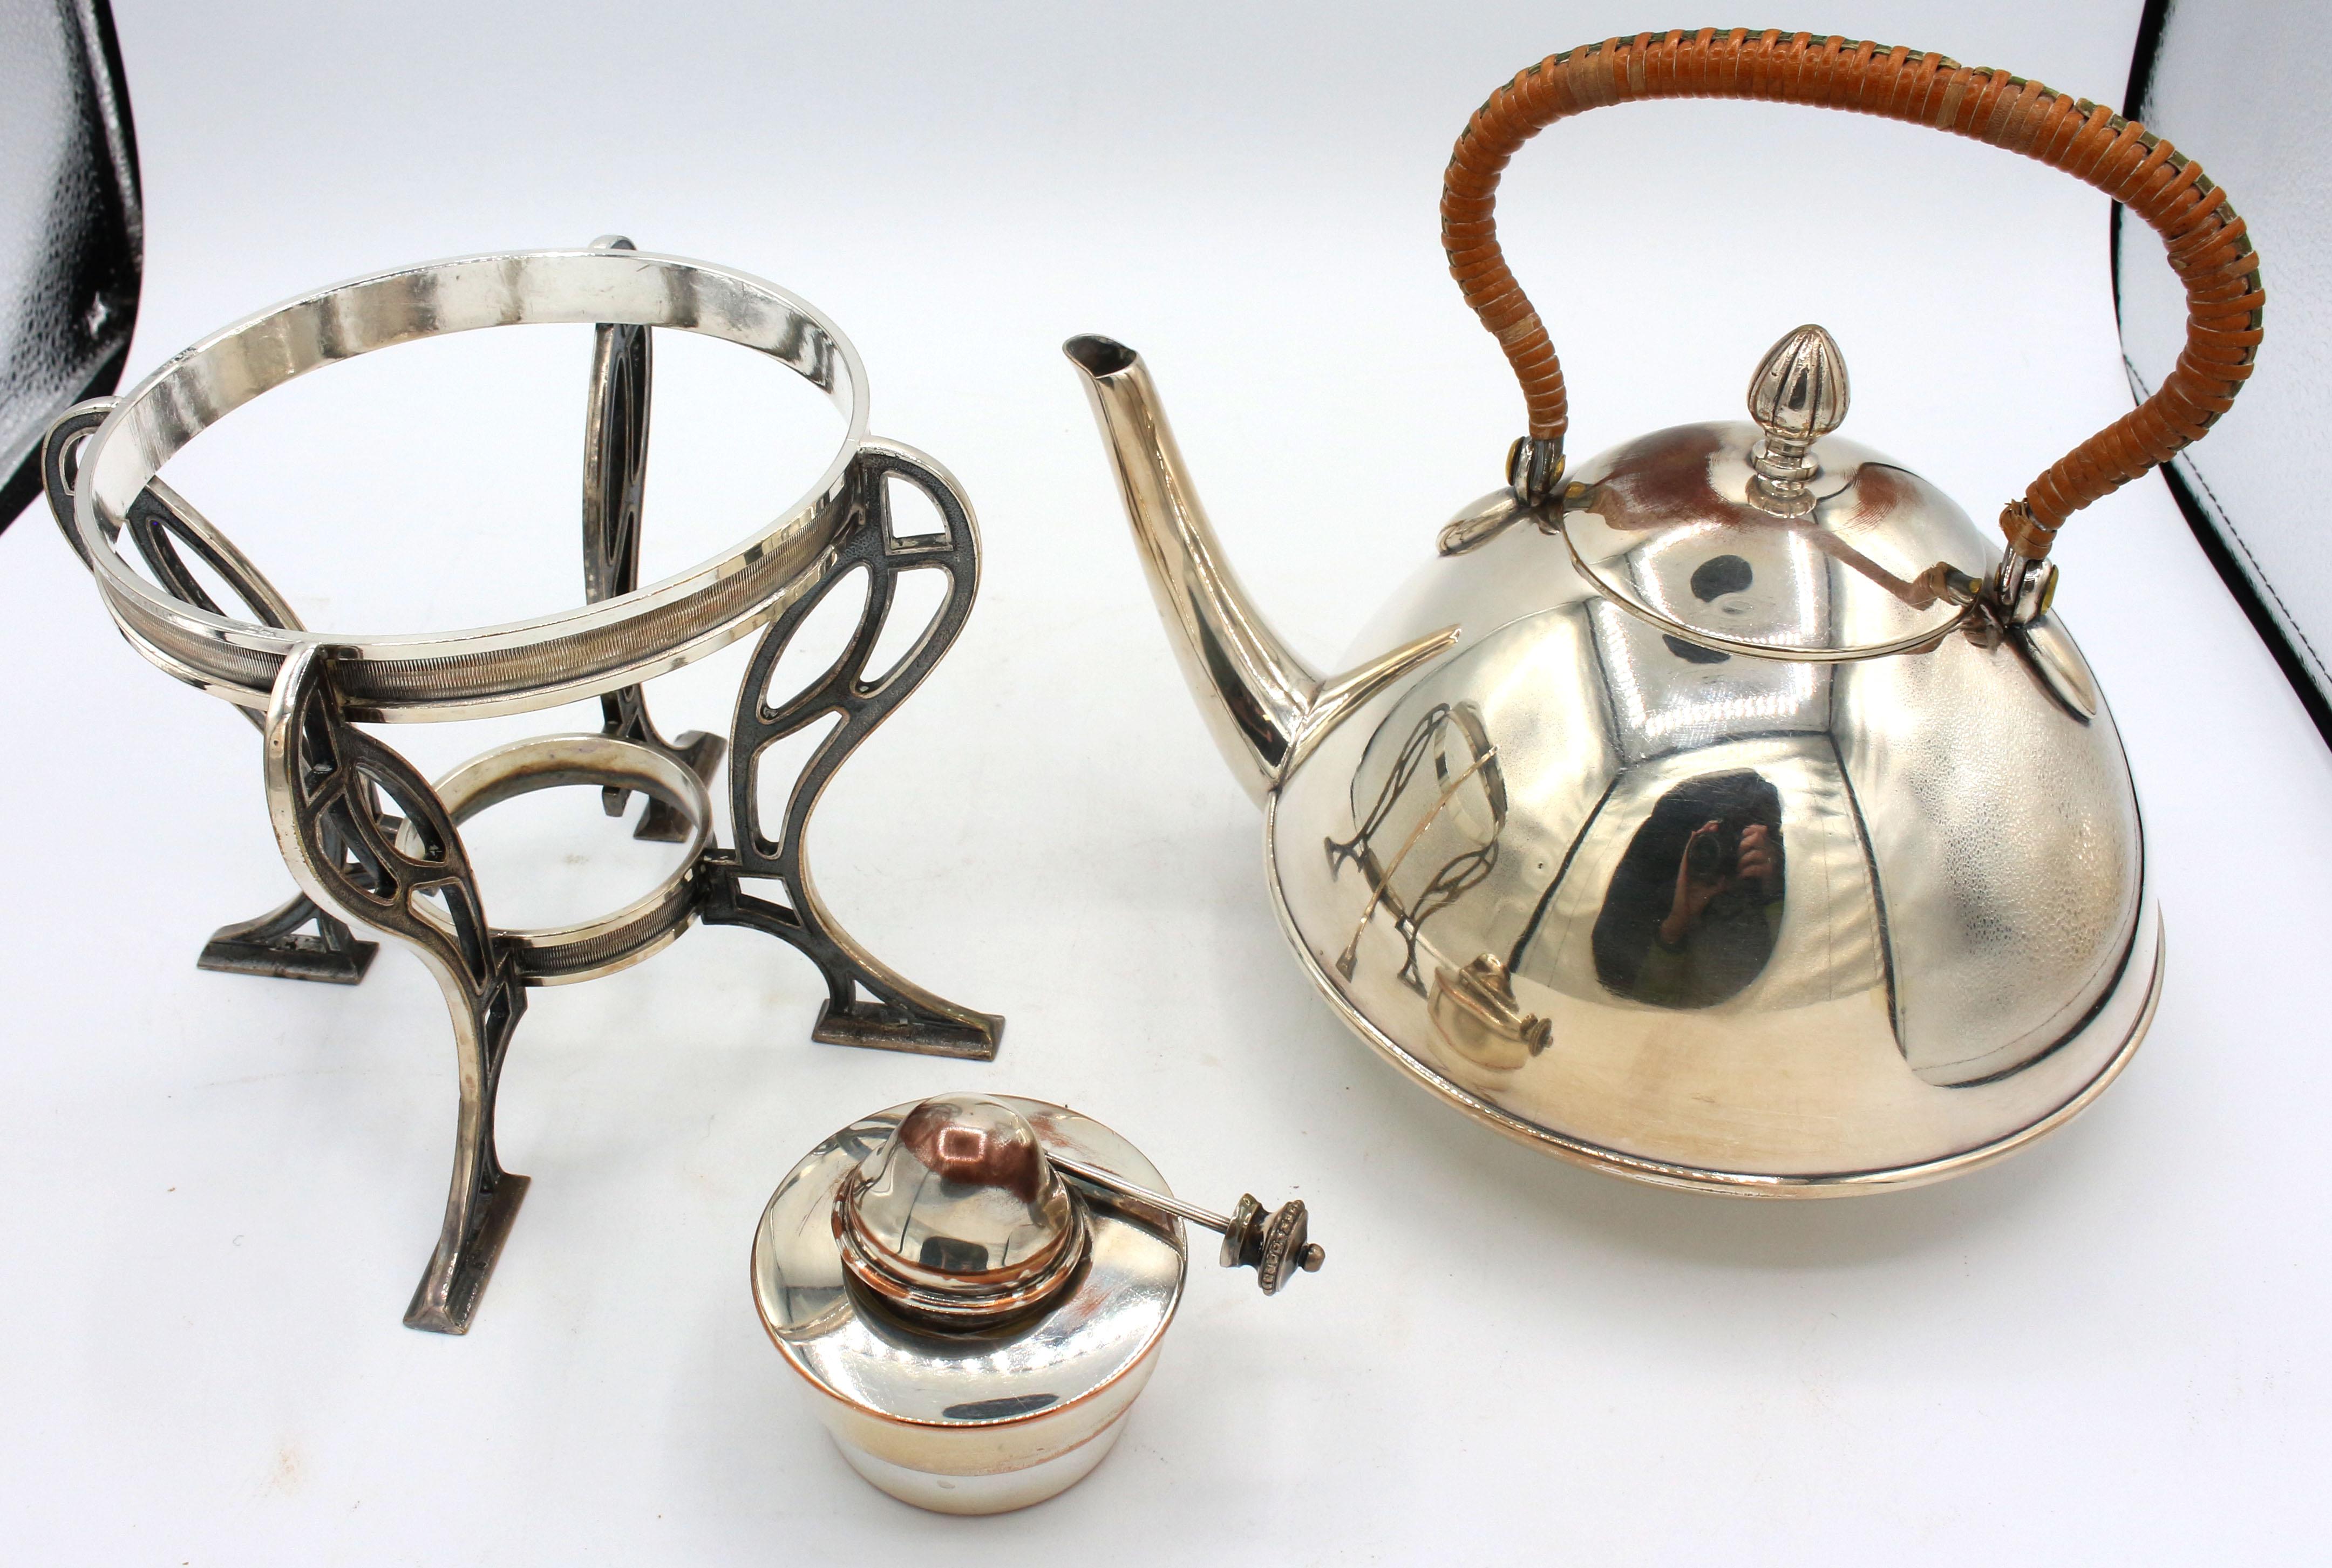 Japonisme spirit kettle on stand with burner, c.1900, probably Stockholm. Arts & Crafts substyle. Silver on copper kettle & burner, silver on brass or bronze stand. Marked: GAB & MS. Raffia wrapped handle. Some copper bleeding, especially on the